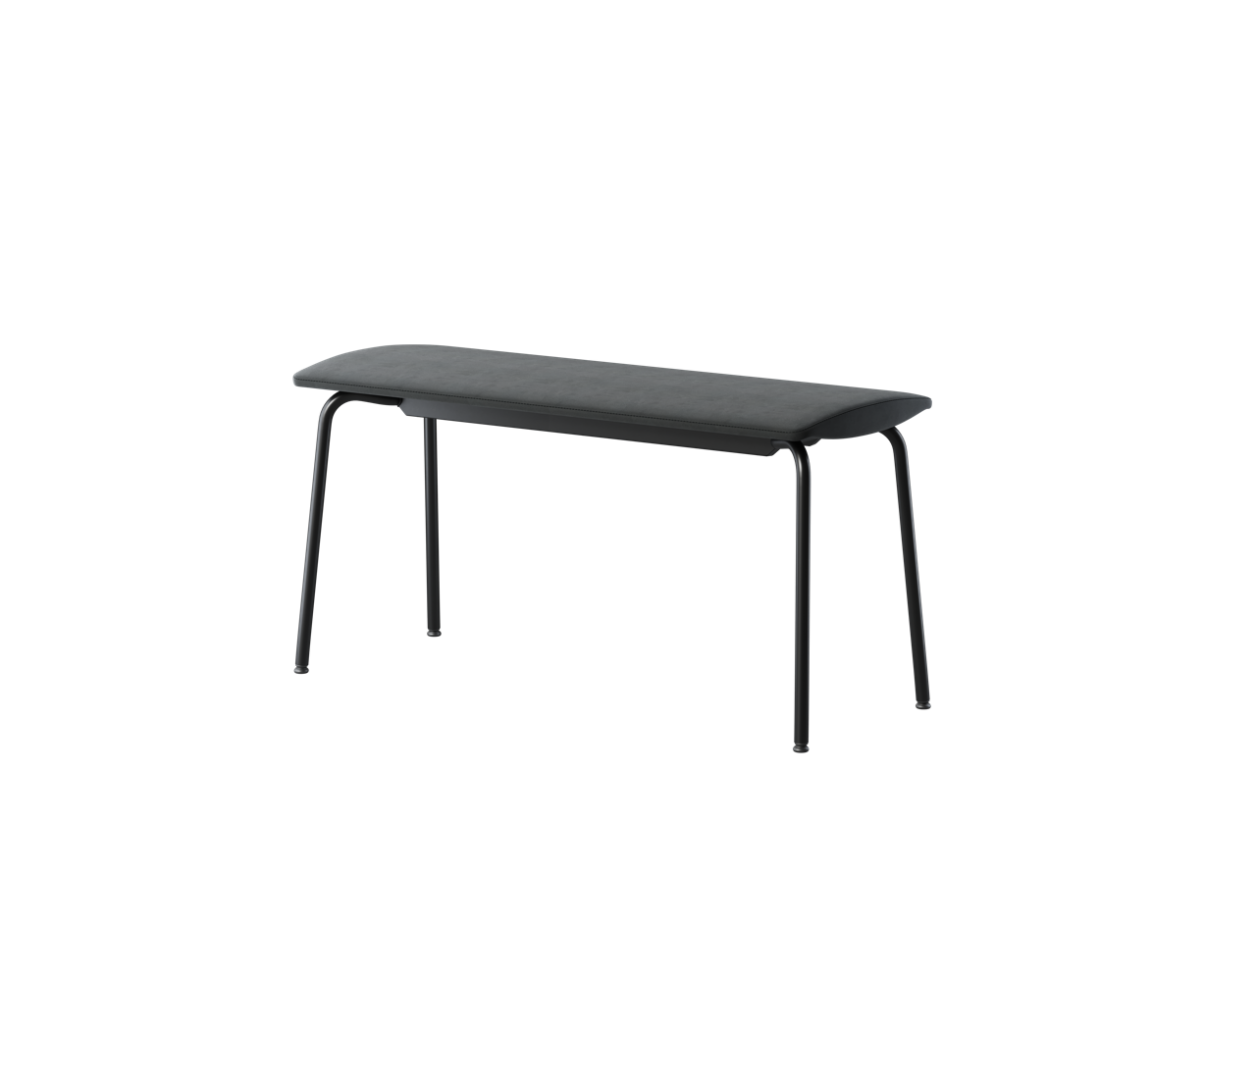 OCEE&FOUR – Stools & Benches – Share Bench – Packshot Image(52) Large